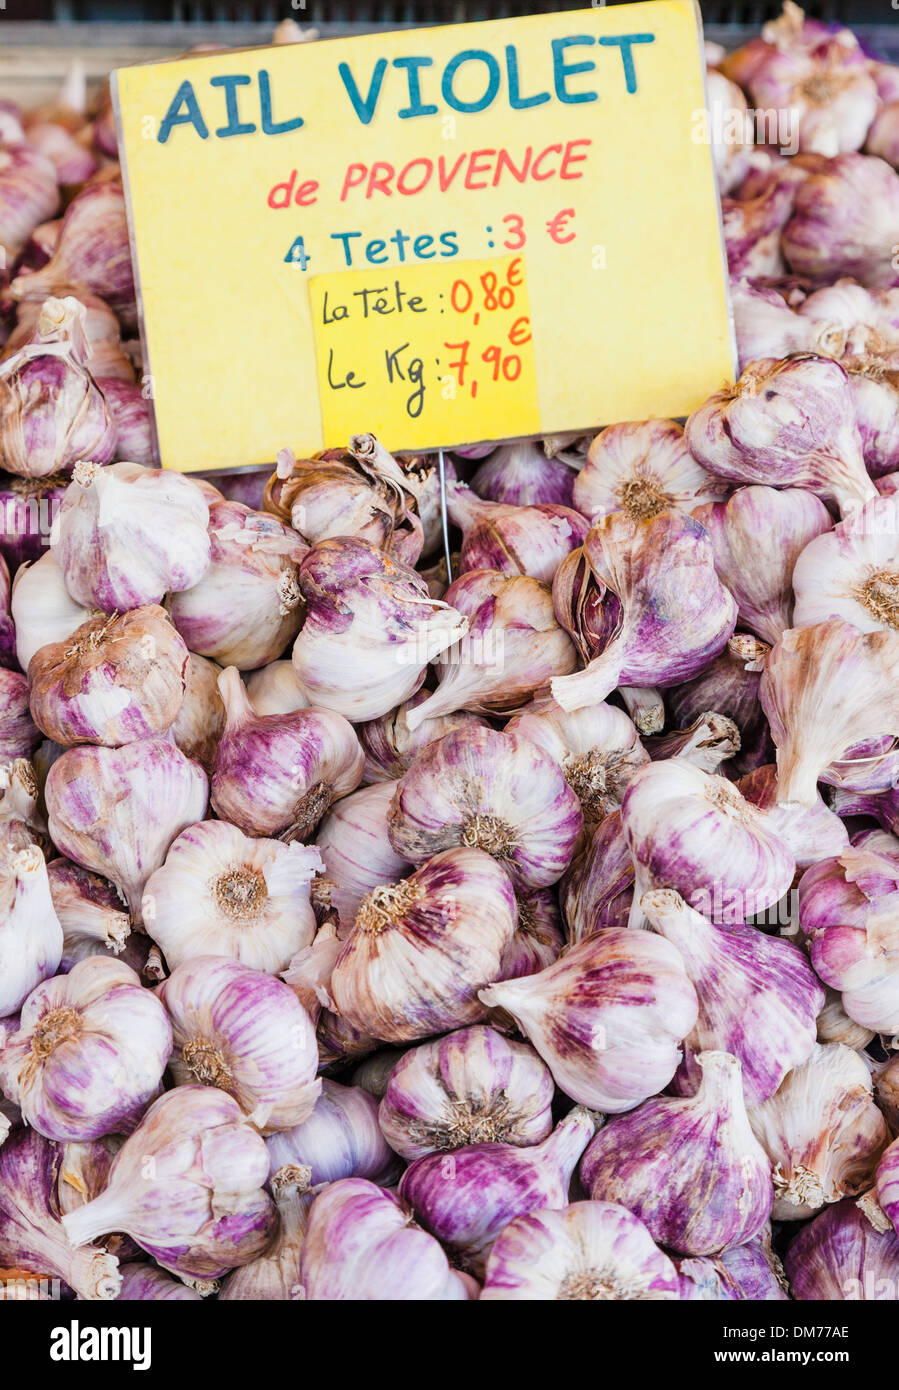 Ail Violet garlic for sale in the market in Annecy old town, Annecy, Savoie, France Stock Photo